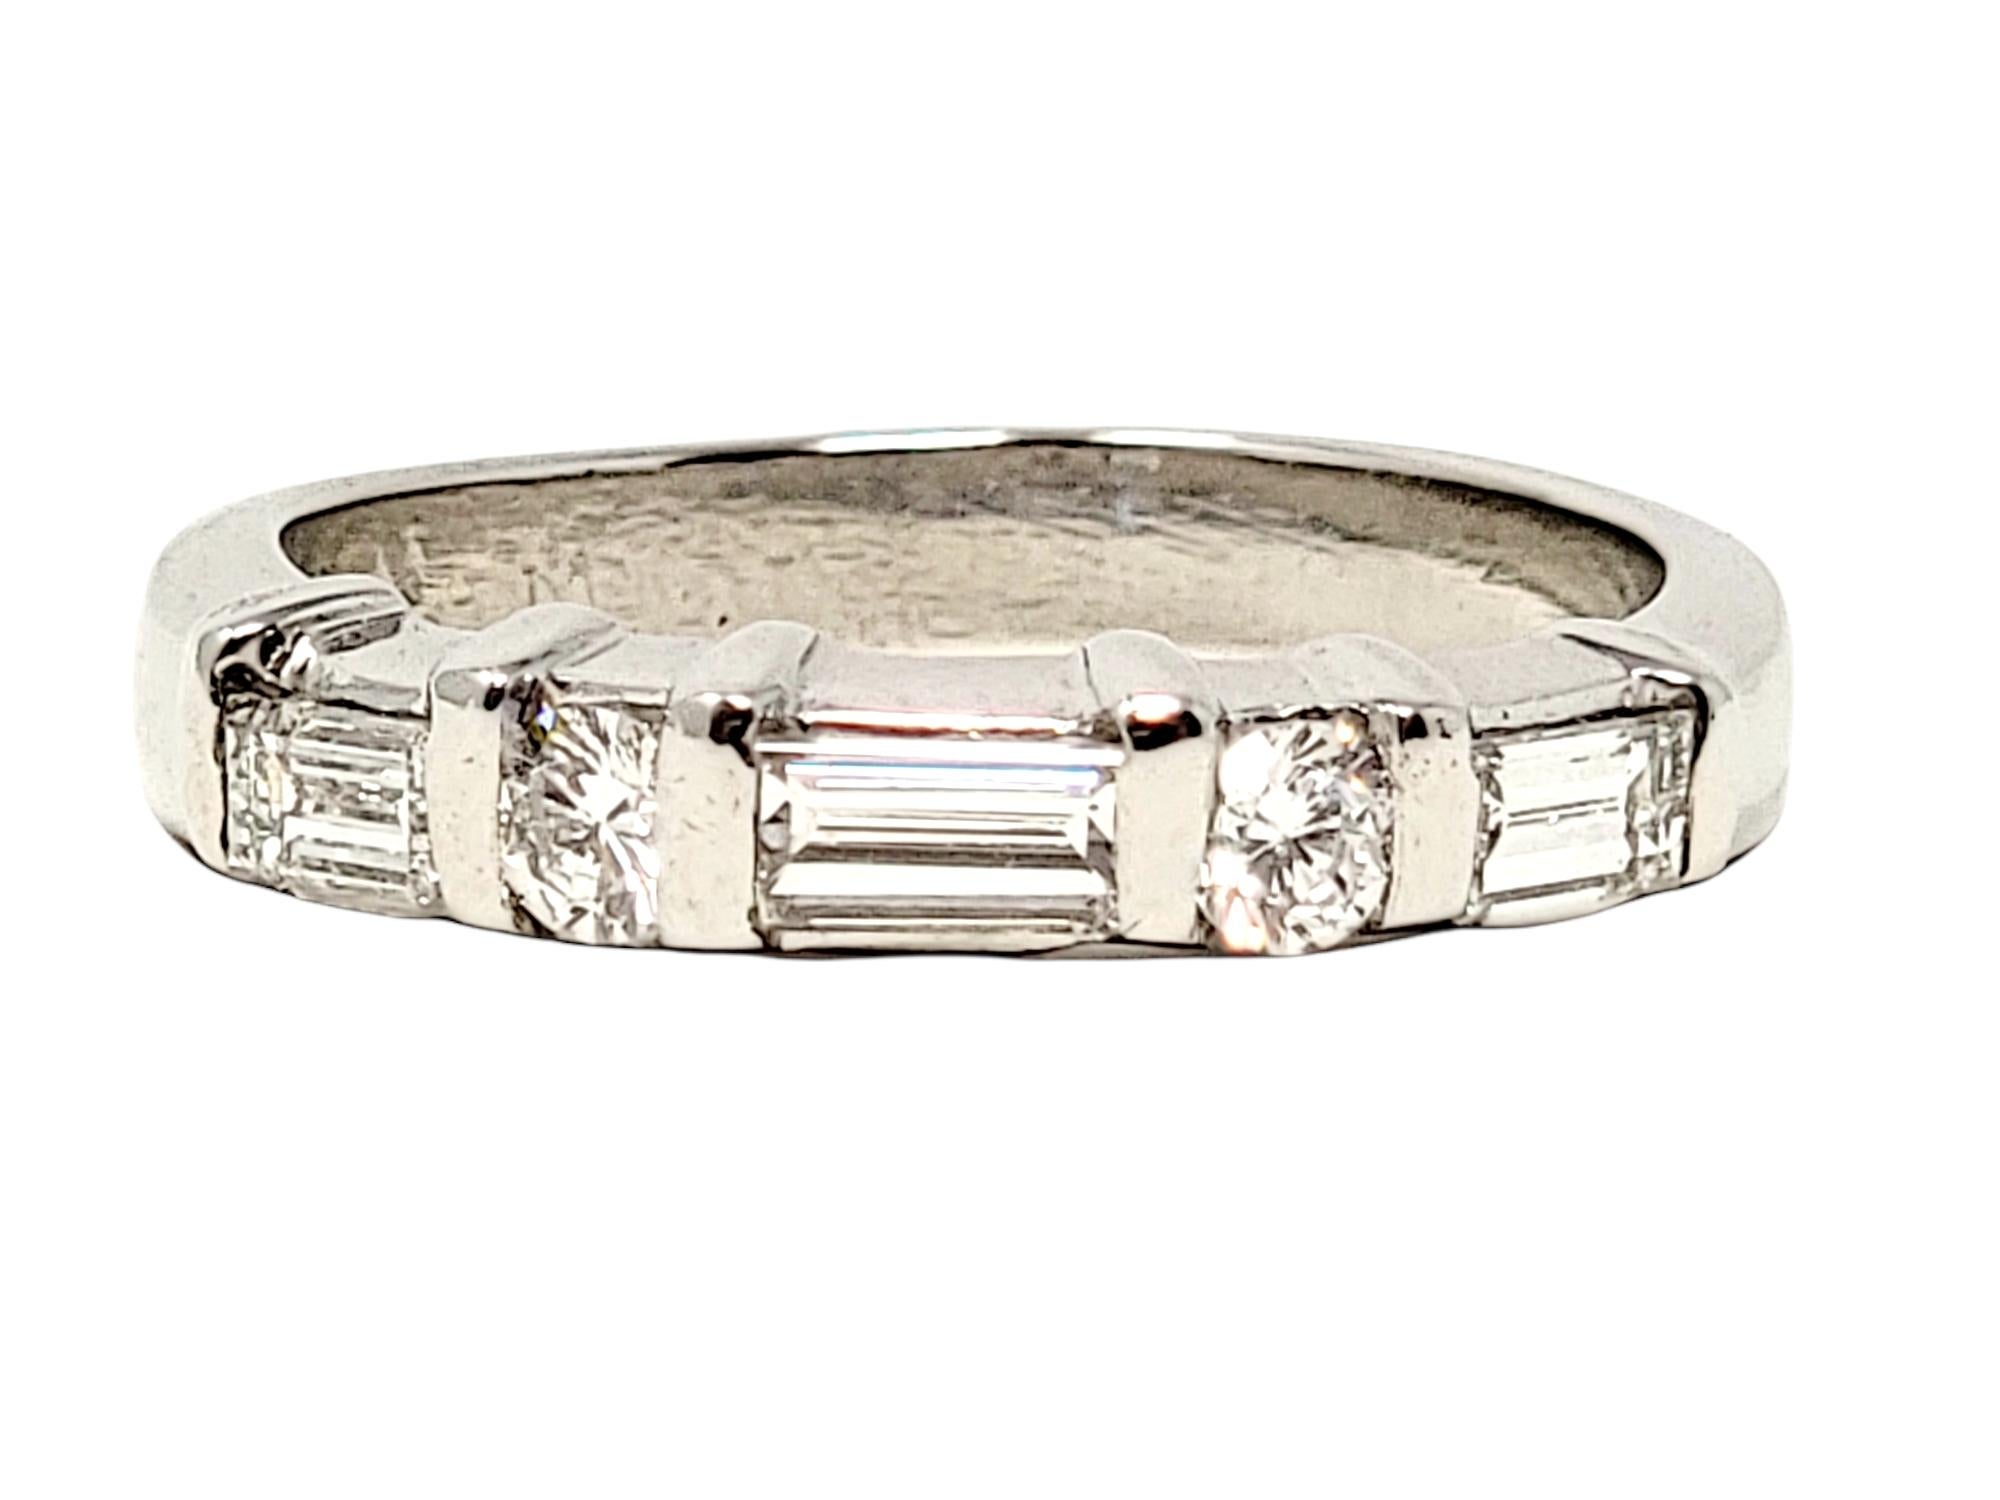 Ring size: 5.75

Stunning round and baguette diamond band ring. This sparkling beauty features icy white diamonds set in a single row, with the different shaped stones separated by polished platinum rows. Pair this versatile piece with your